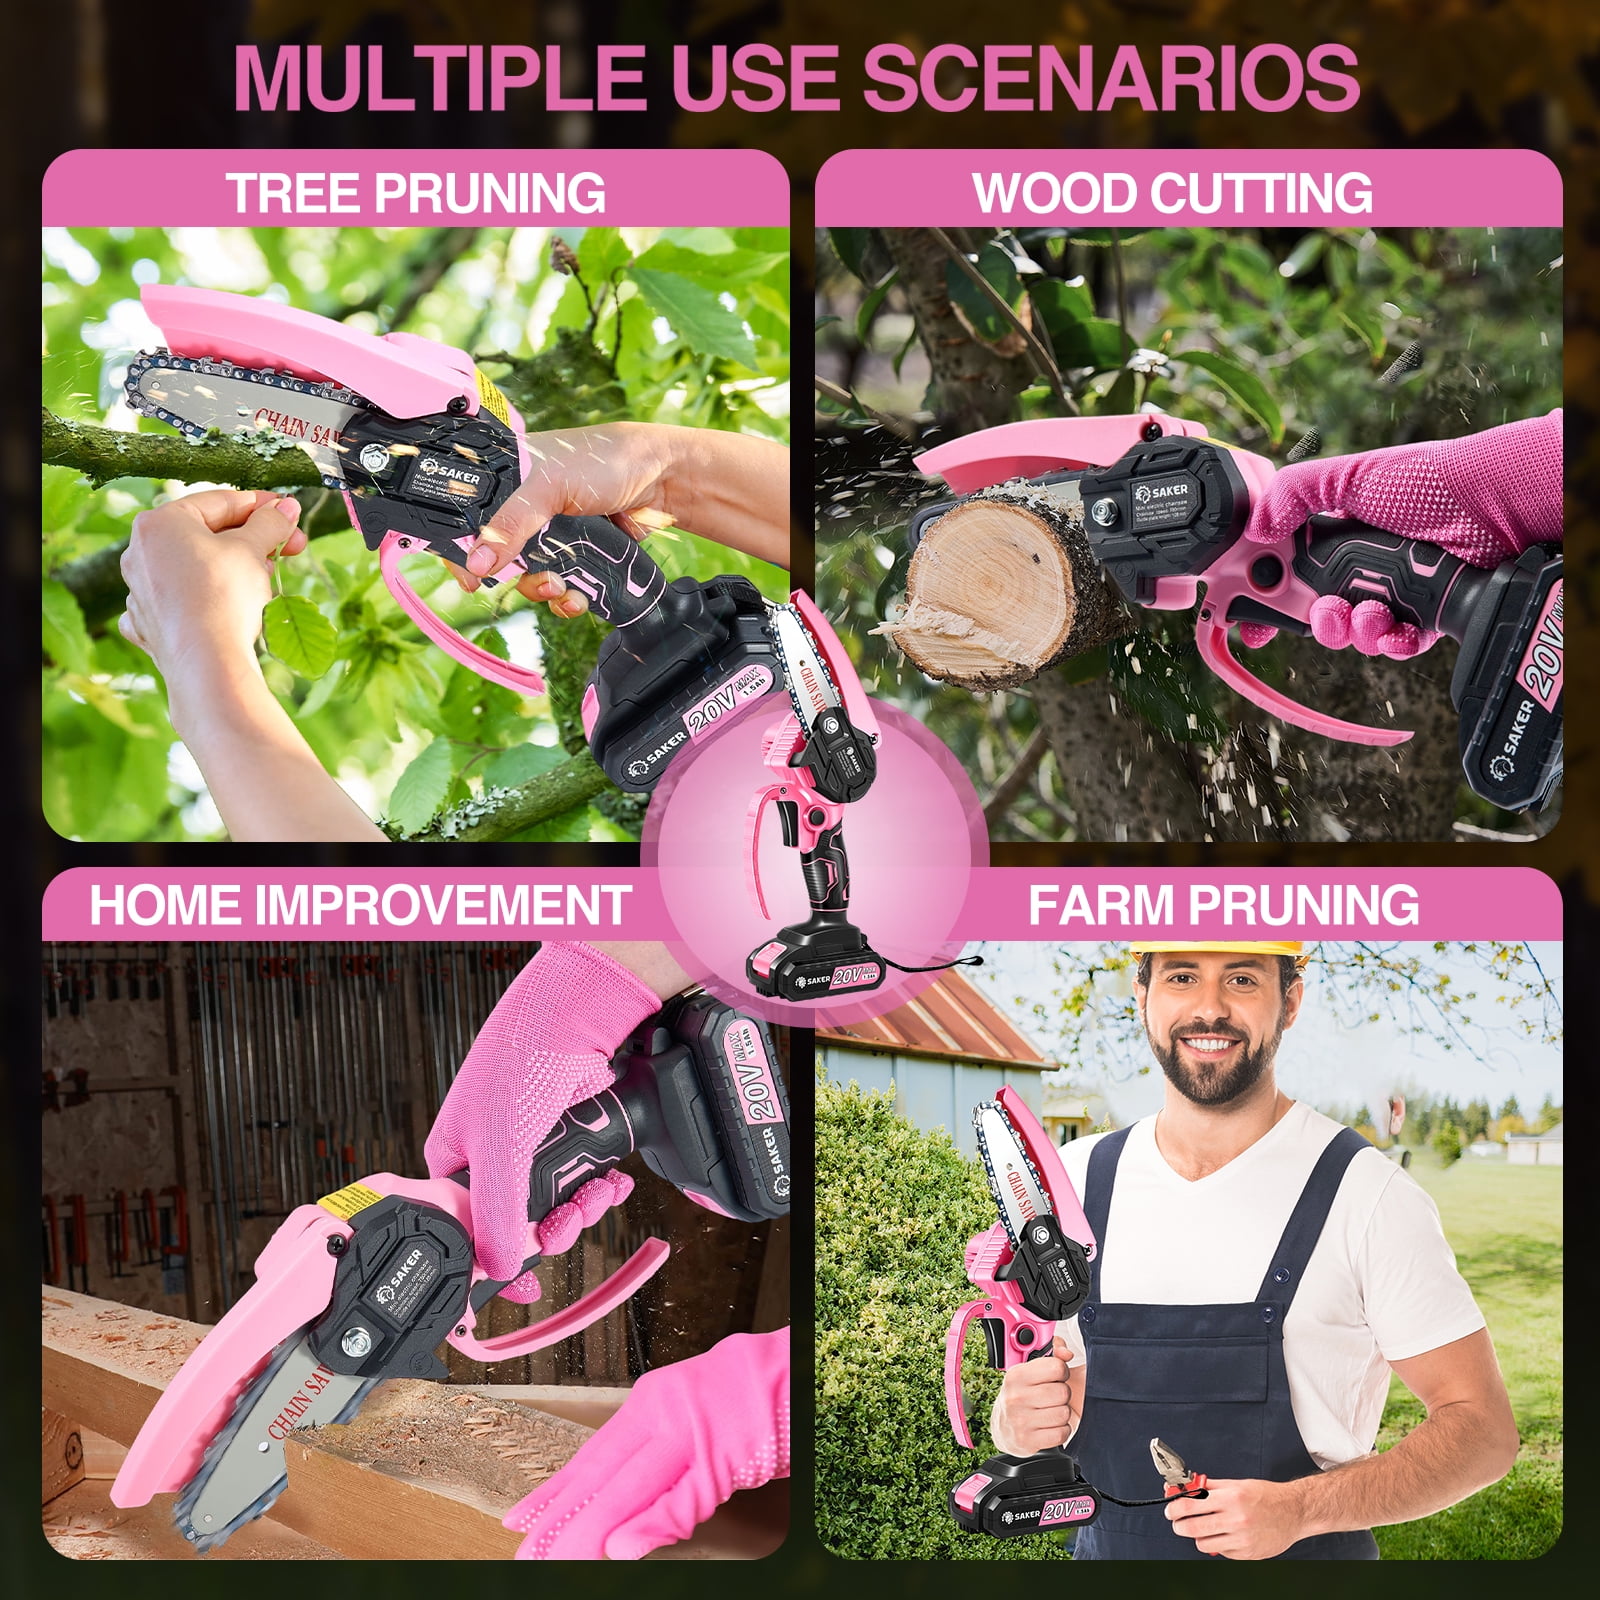 🌲✂️ Gear Up for Summer DIY! Save 35% on the SAKER® Mini Chainsaw and  Conquer Your Outdoor Projects! - Smart Saker